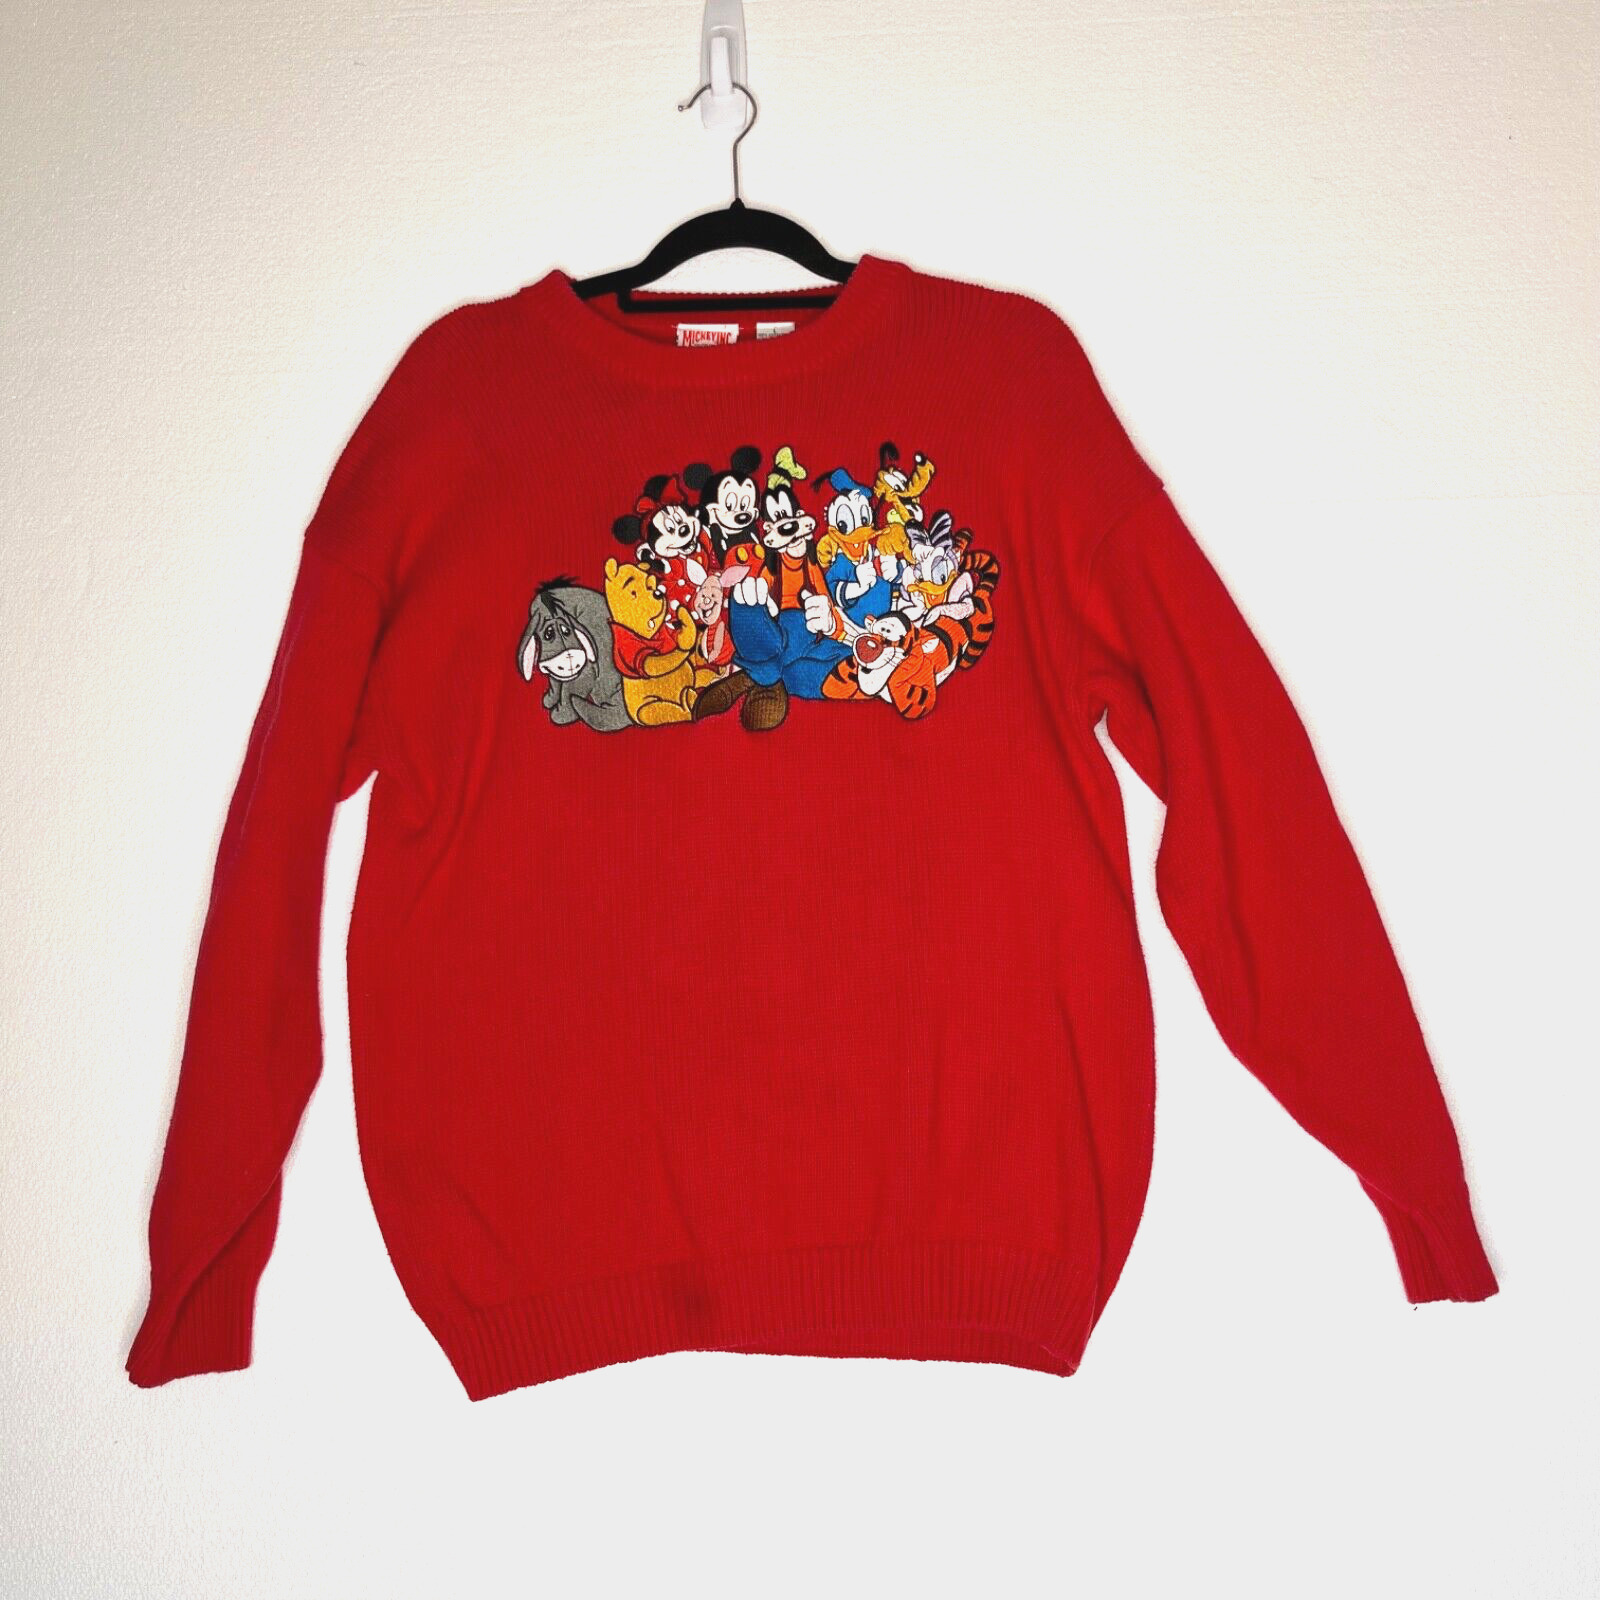 Mickey, Inc. Vintage 1990 Cotton Red Mickey Mouse Friends Sweater Size L Unisex